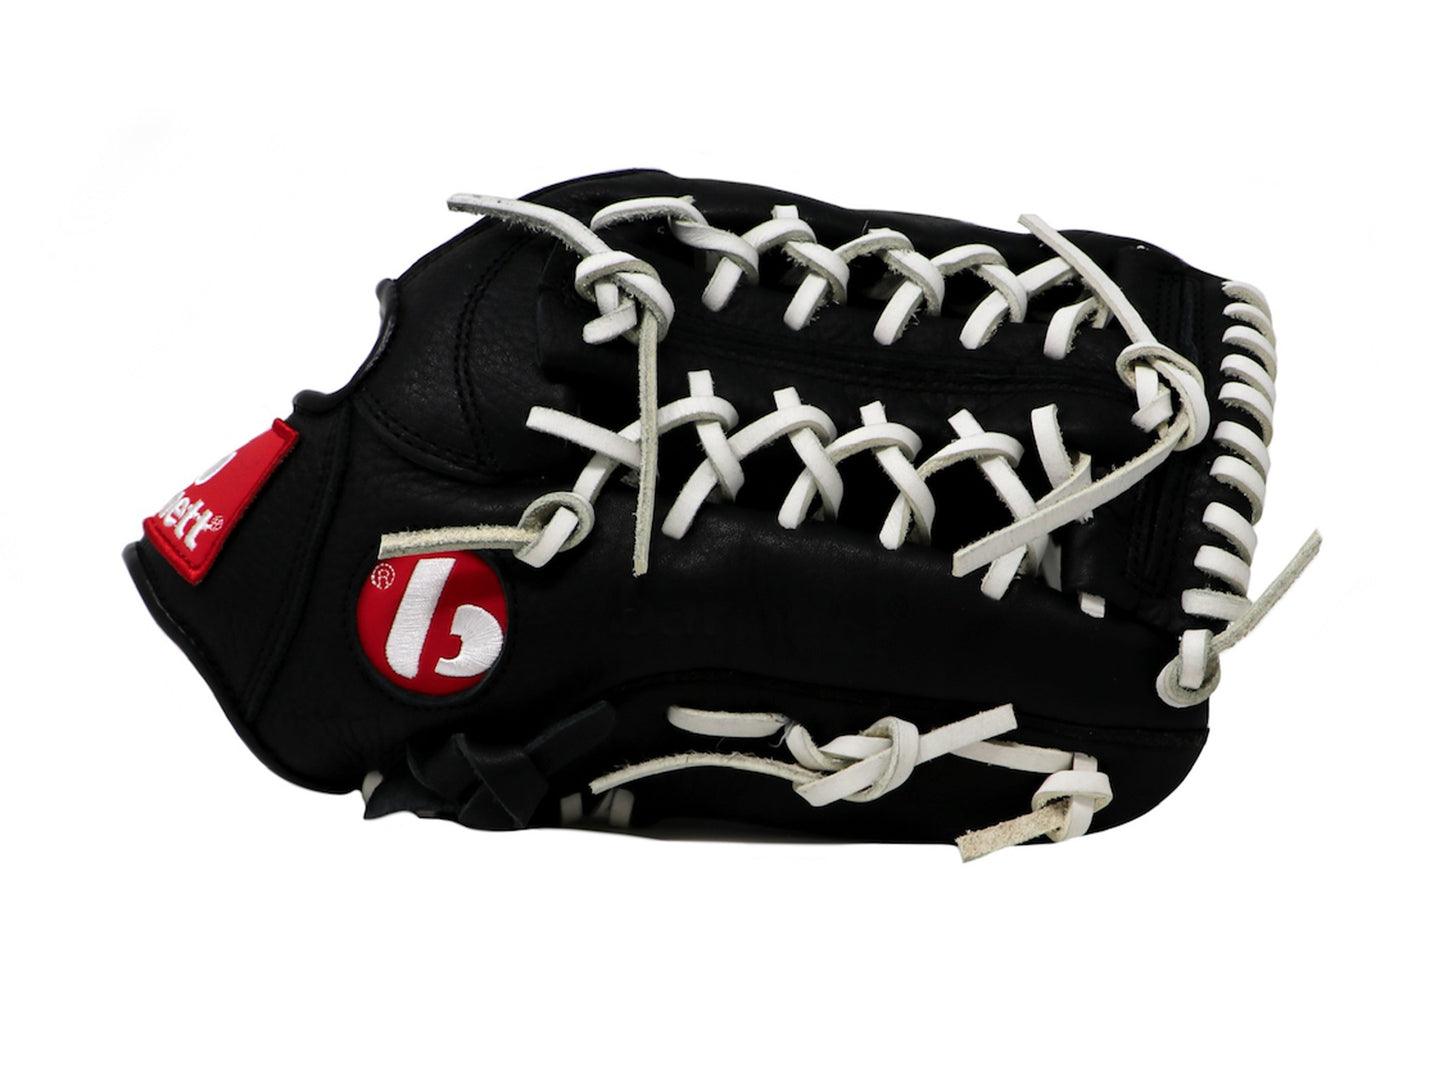 GL-125 Competition baseball glove, genuine leather, outfield 12.5, Black